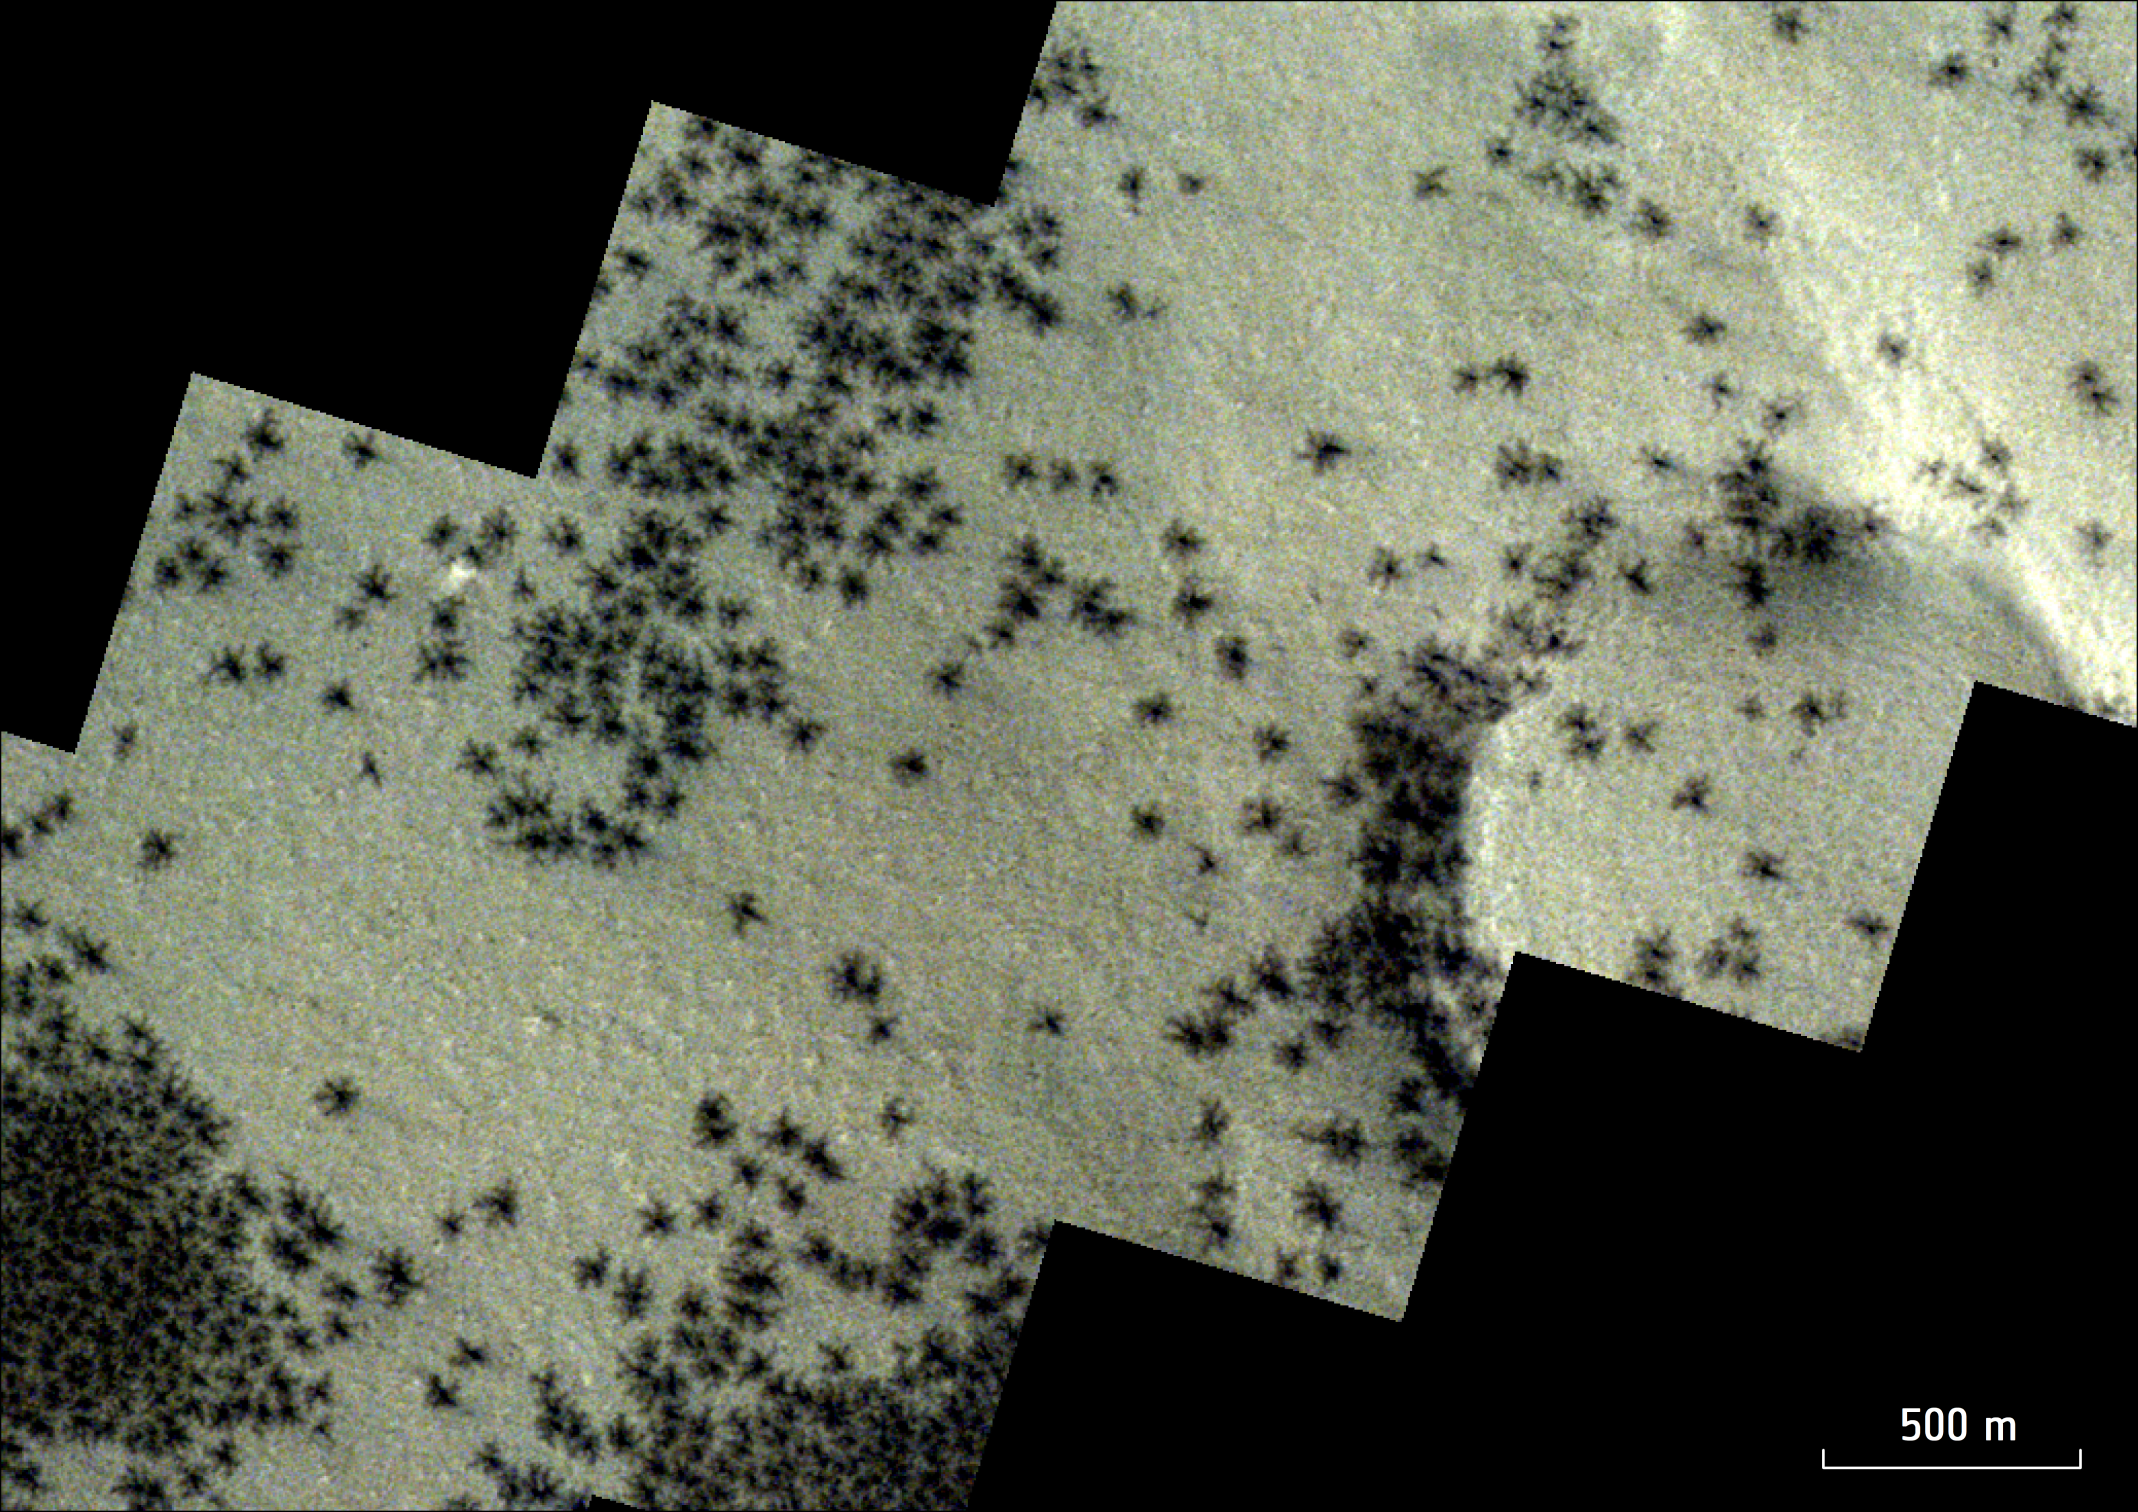 A slice of the martian surface is shown here. A rounded segment of an eroded crater basin is visible to the right. The key features seen across the image are dark spots with tendrils that are eerily reminiscent of spiders. These are visible in large numbers to the left, and scattered irregularly across the rest of the image.